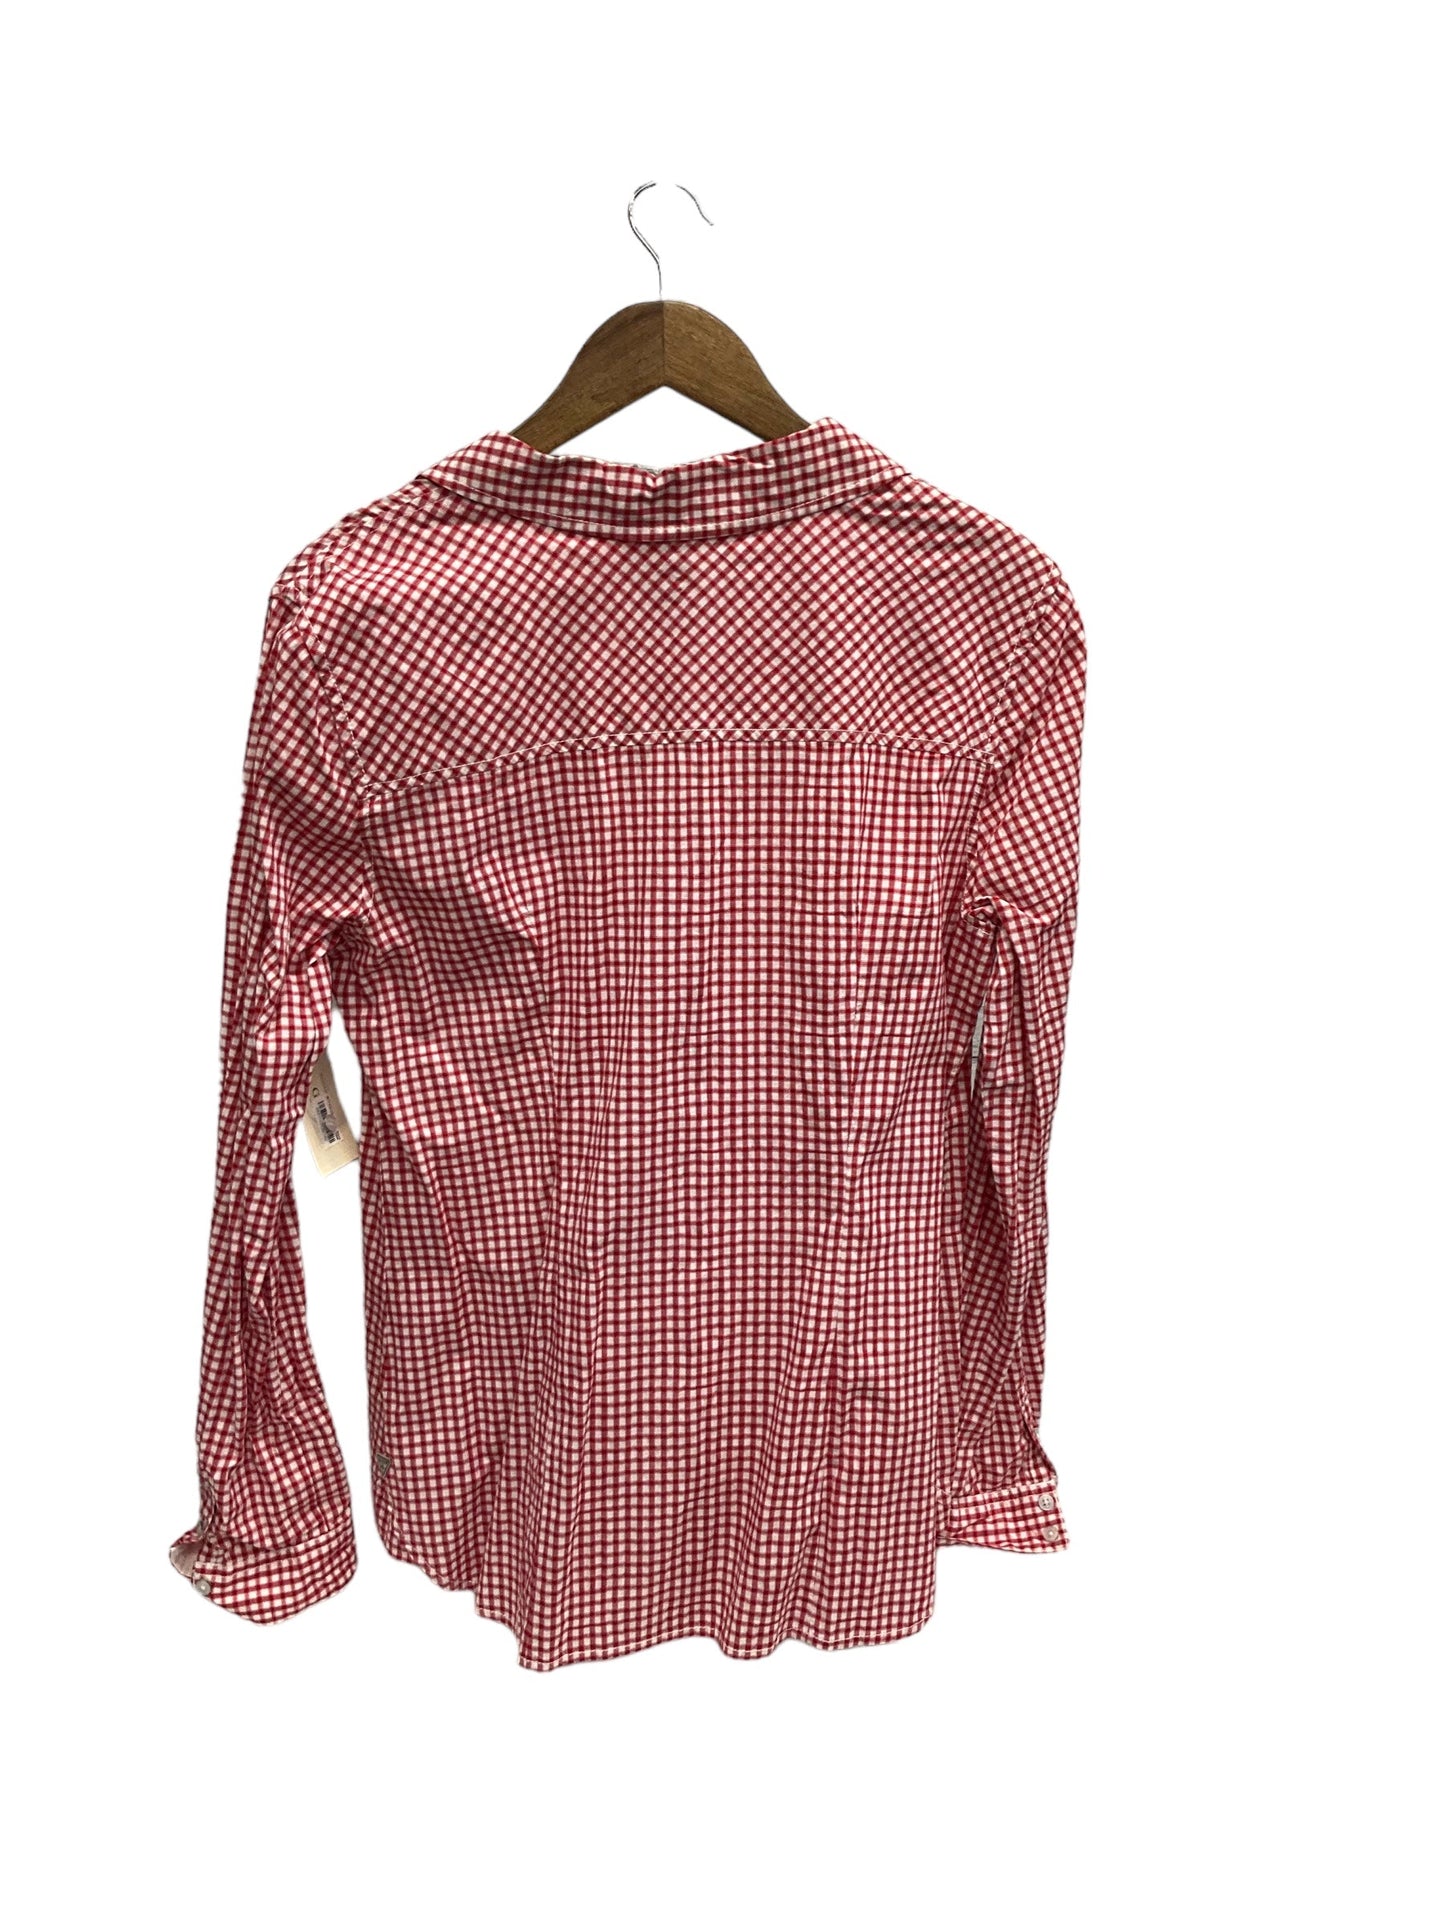 Blouse Long Sleeve By Guess  Size: Xl